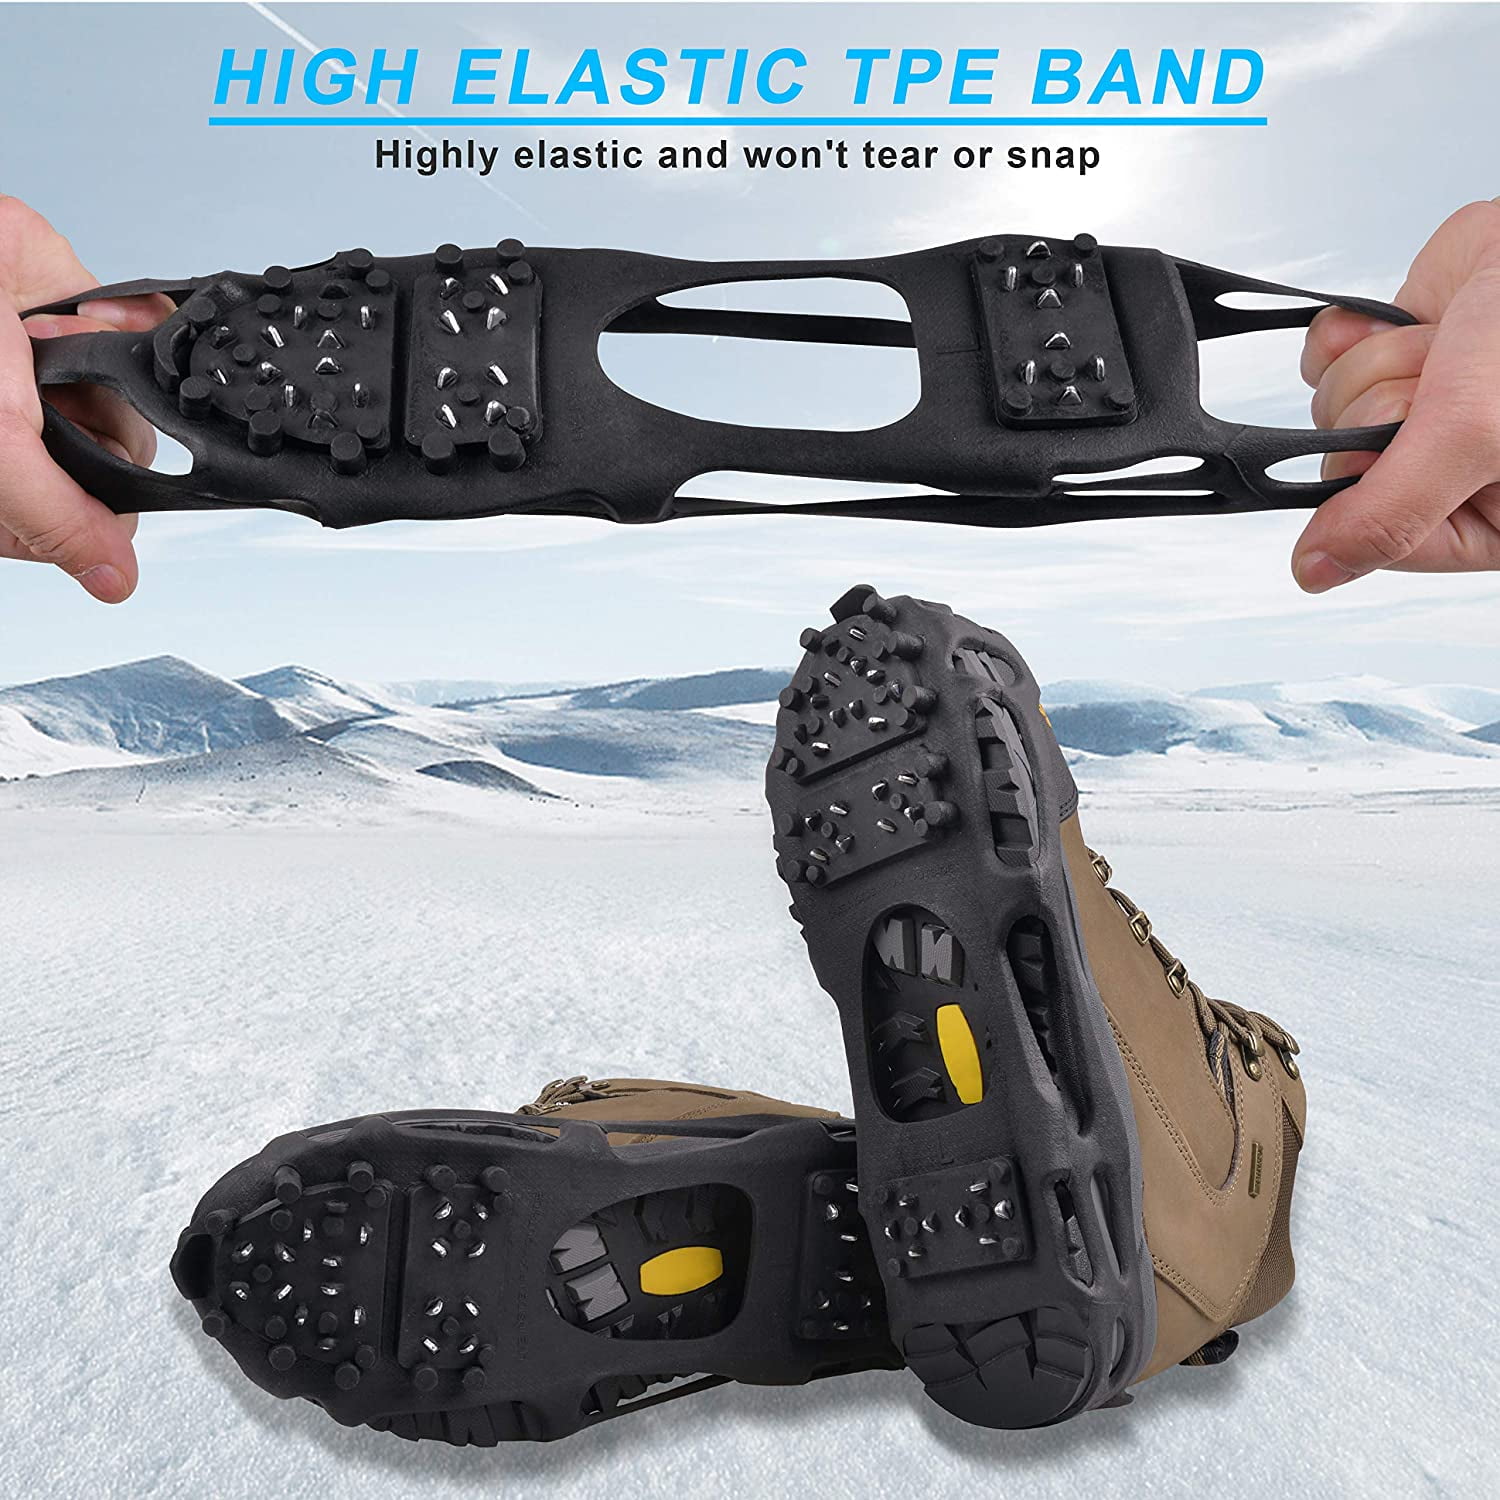 DUALF Traction Cleats Snow Grips Ice Creepers Over Shoe Boot,Anti Slip 10-Studs TPE Rubber Crampons with 10 Free Studs for Footwear Blue/Black